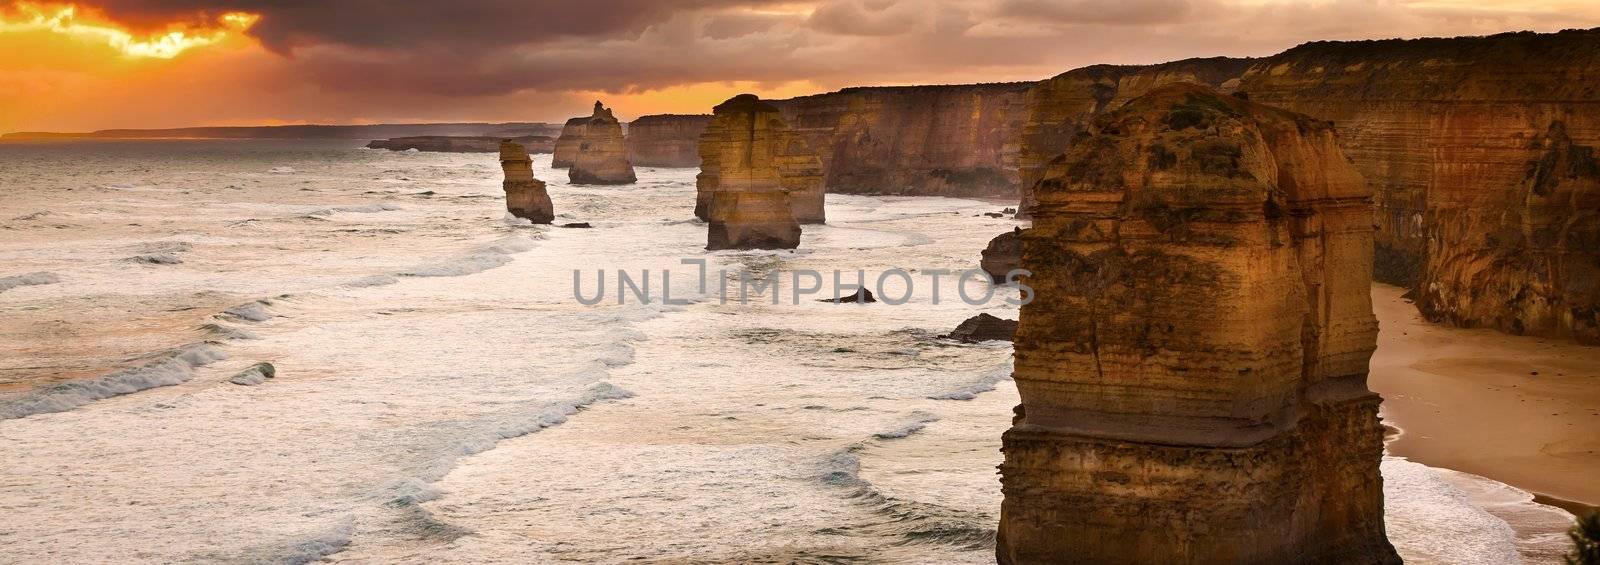 Golden sunset at 12 Apostles rock formation in Victoria, Australia. Dusk sun setting behind the backlit apostles with sea fog rolling in to the cliff face.